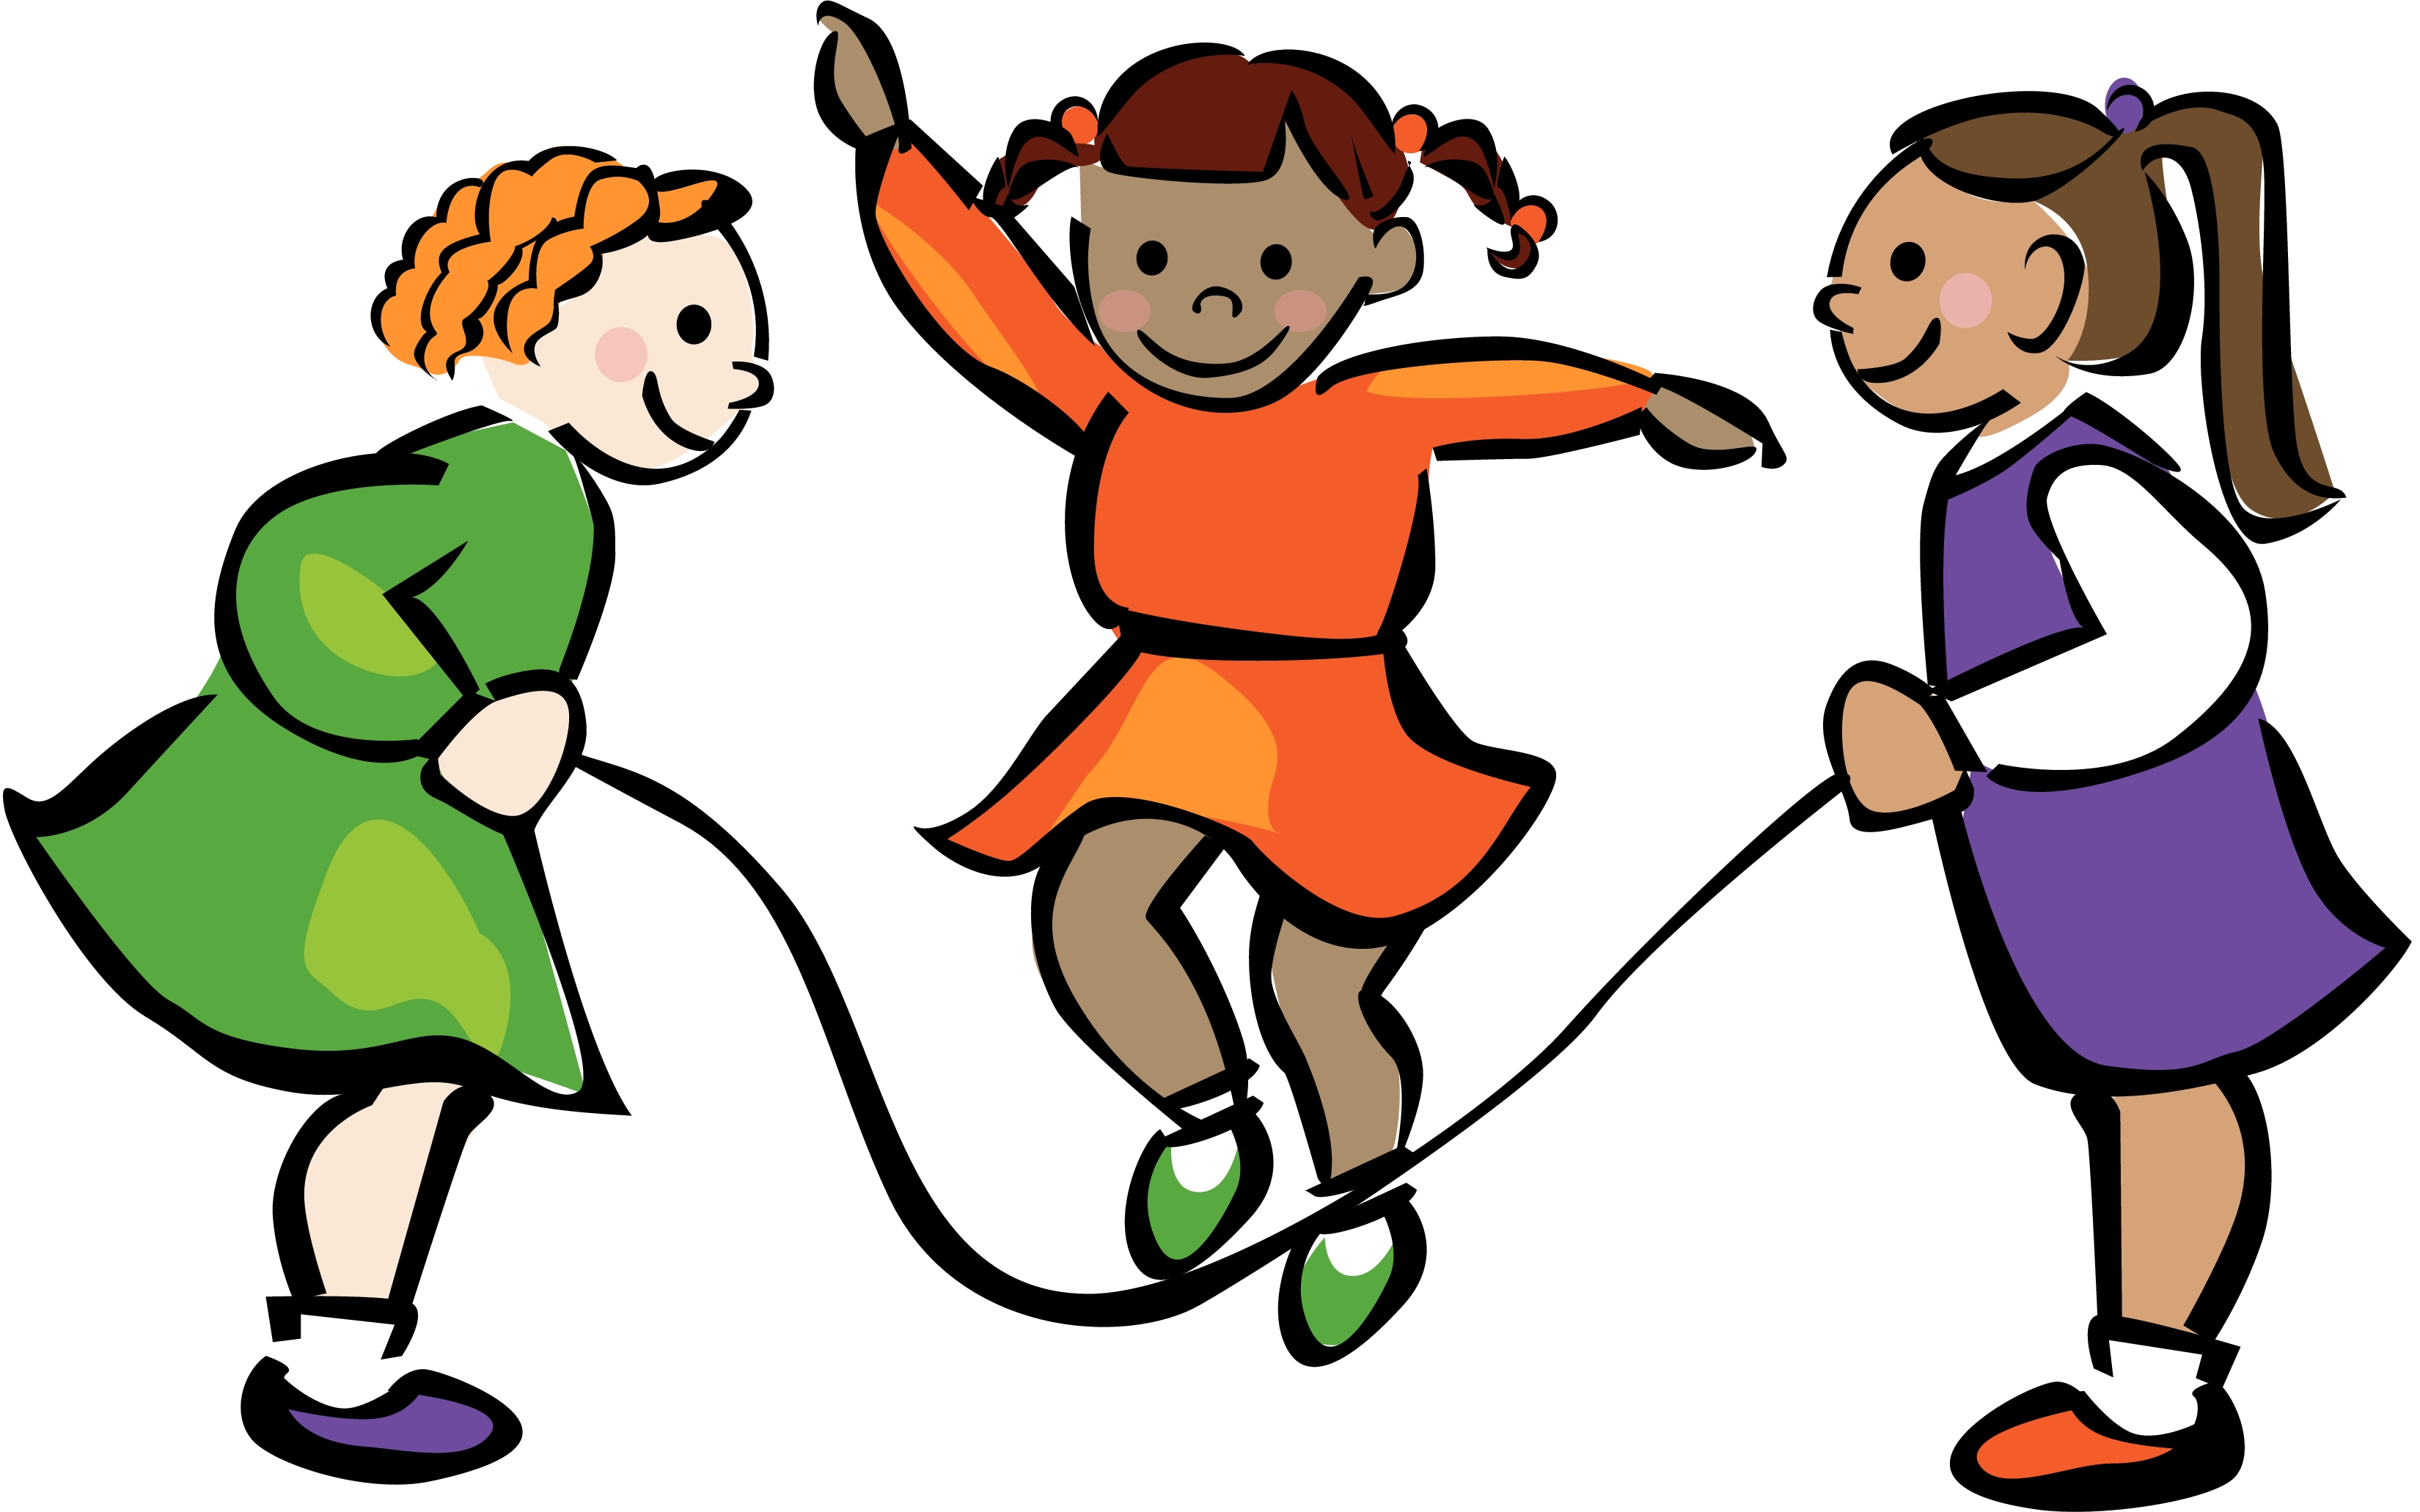 Galleries Related: Children Playing Hopscotch , Children Playing Soccer , Children Riding Bikes , Children Jumping For Joy , Children Jumping Rope Clipart ...